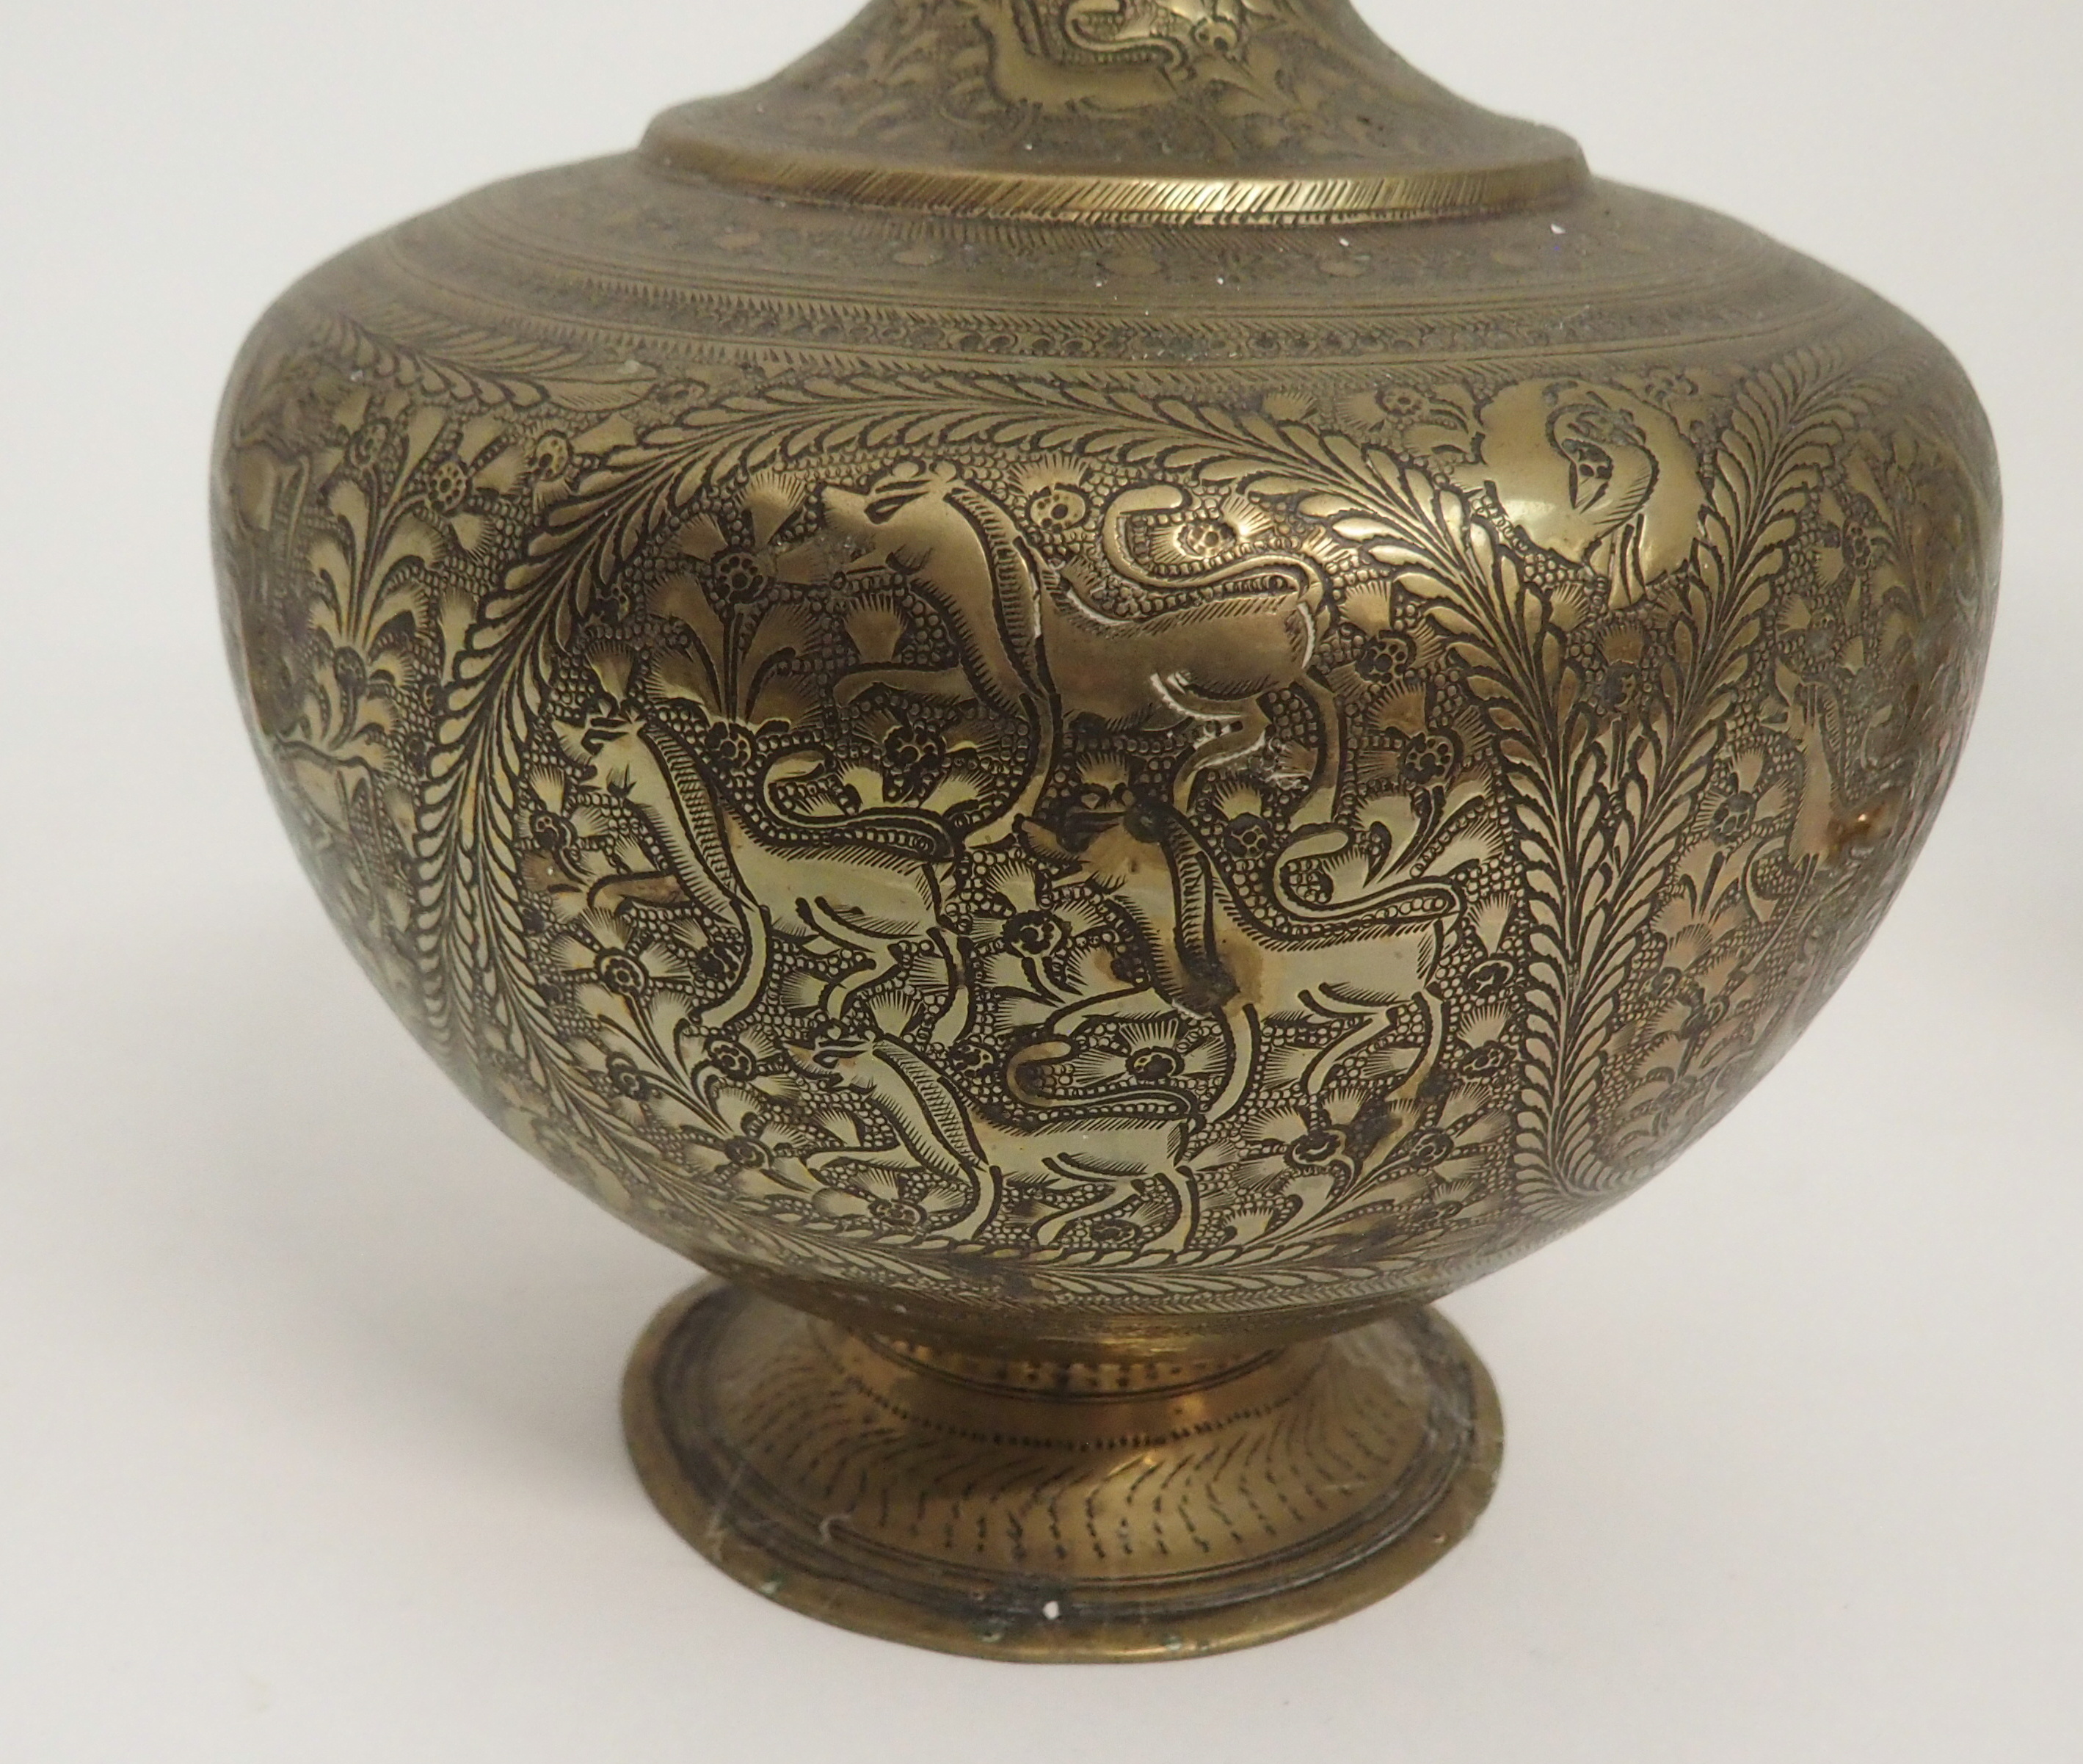 A PERSIAN BRASS VASE decorated with panels of animals, within foliate borders, 28cm high and a - Image 7 of 8